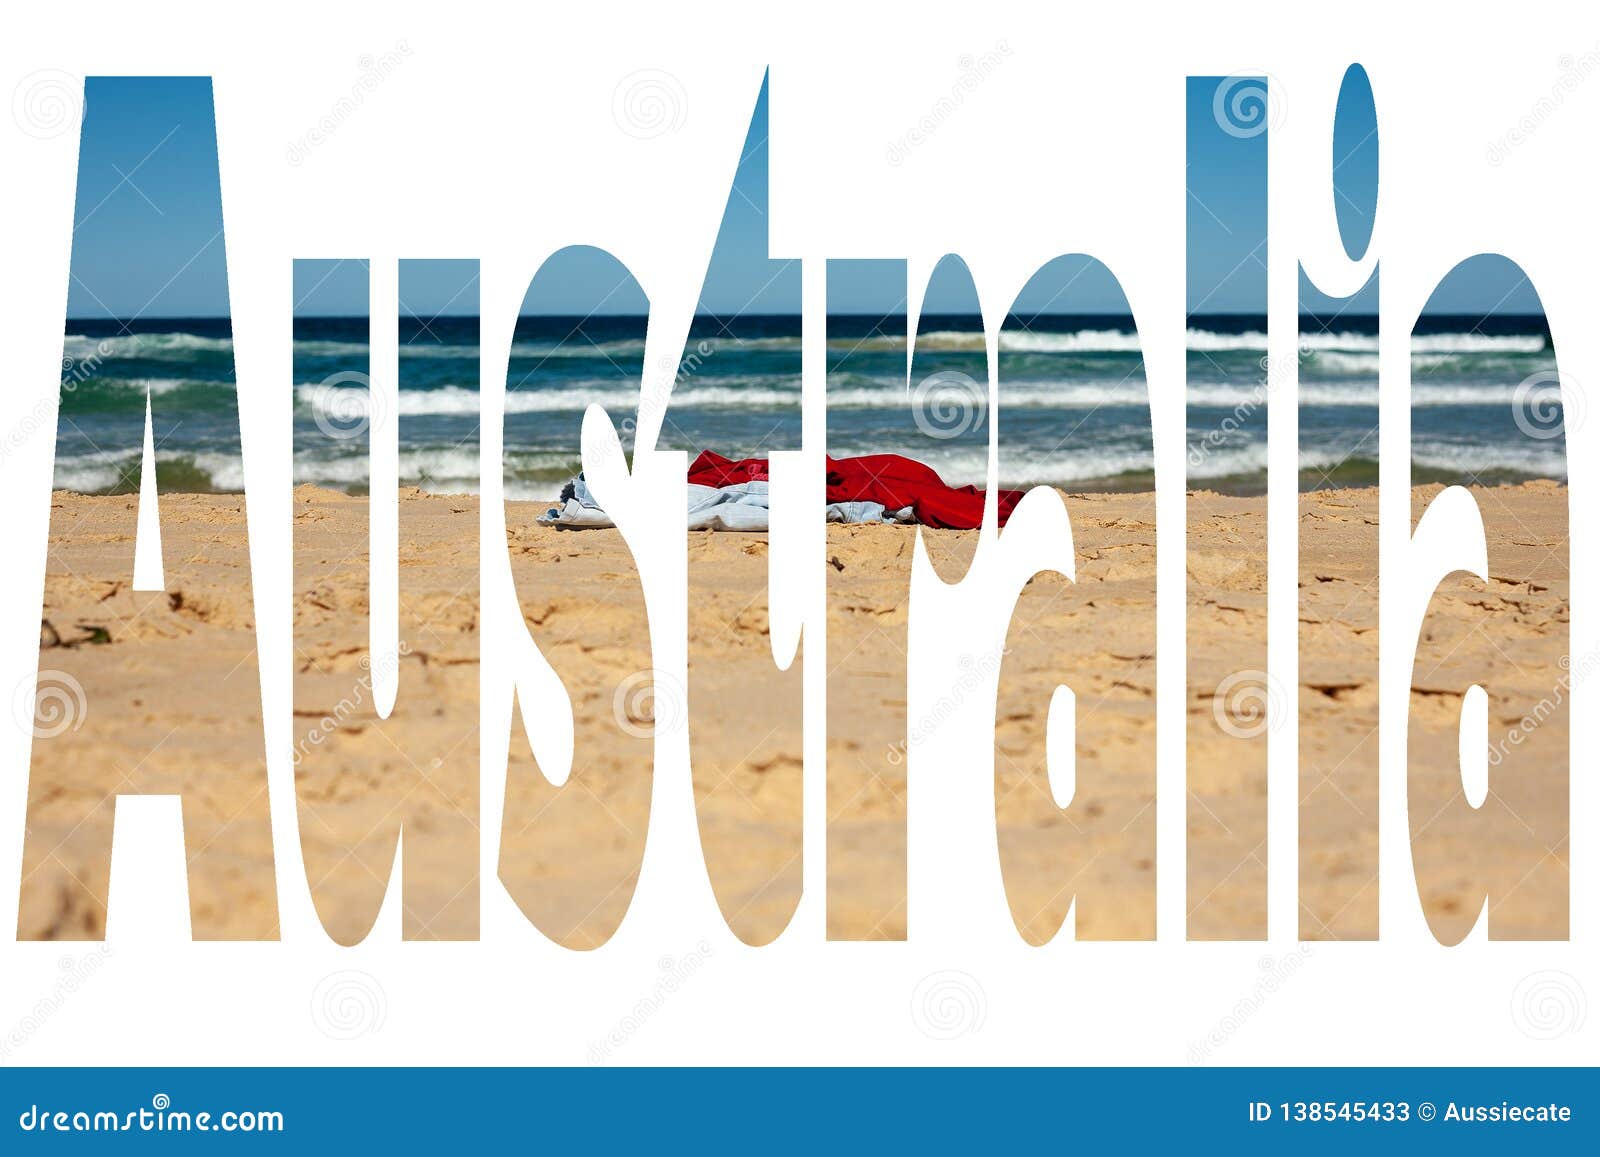 The Word Filled with Iconic Australian Image Clothes Stripped Off at Beach Central Coast NSW Nudist Beach Stock Image - Image of landscape, 138545433